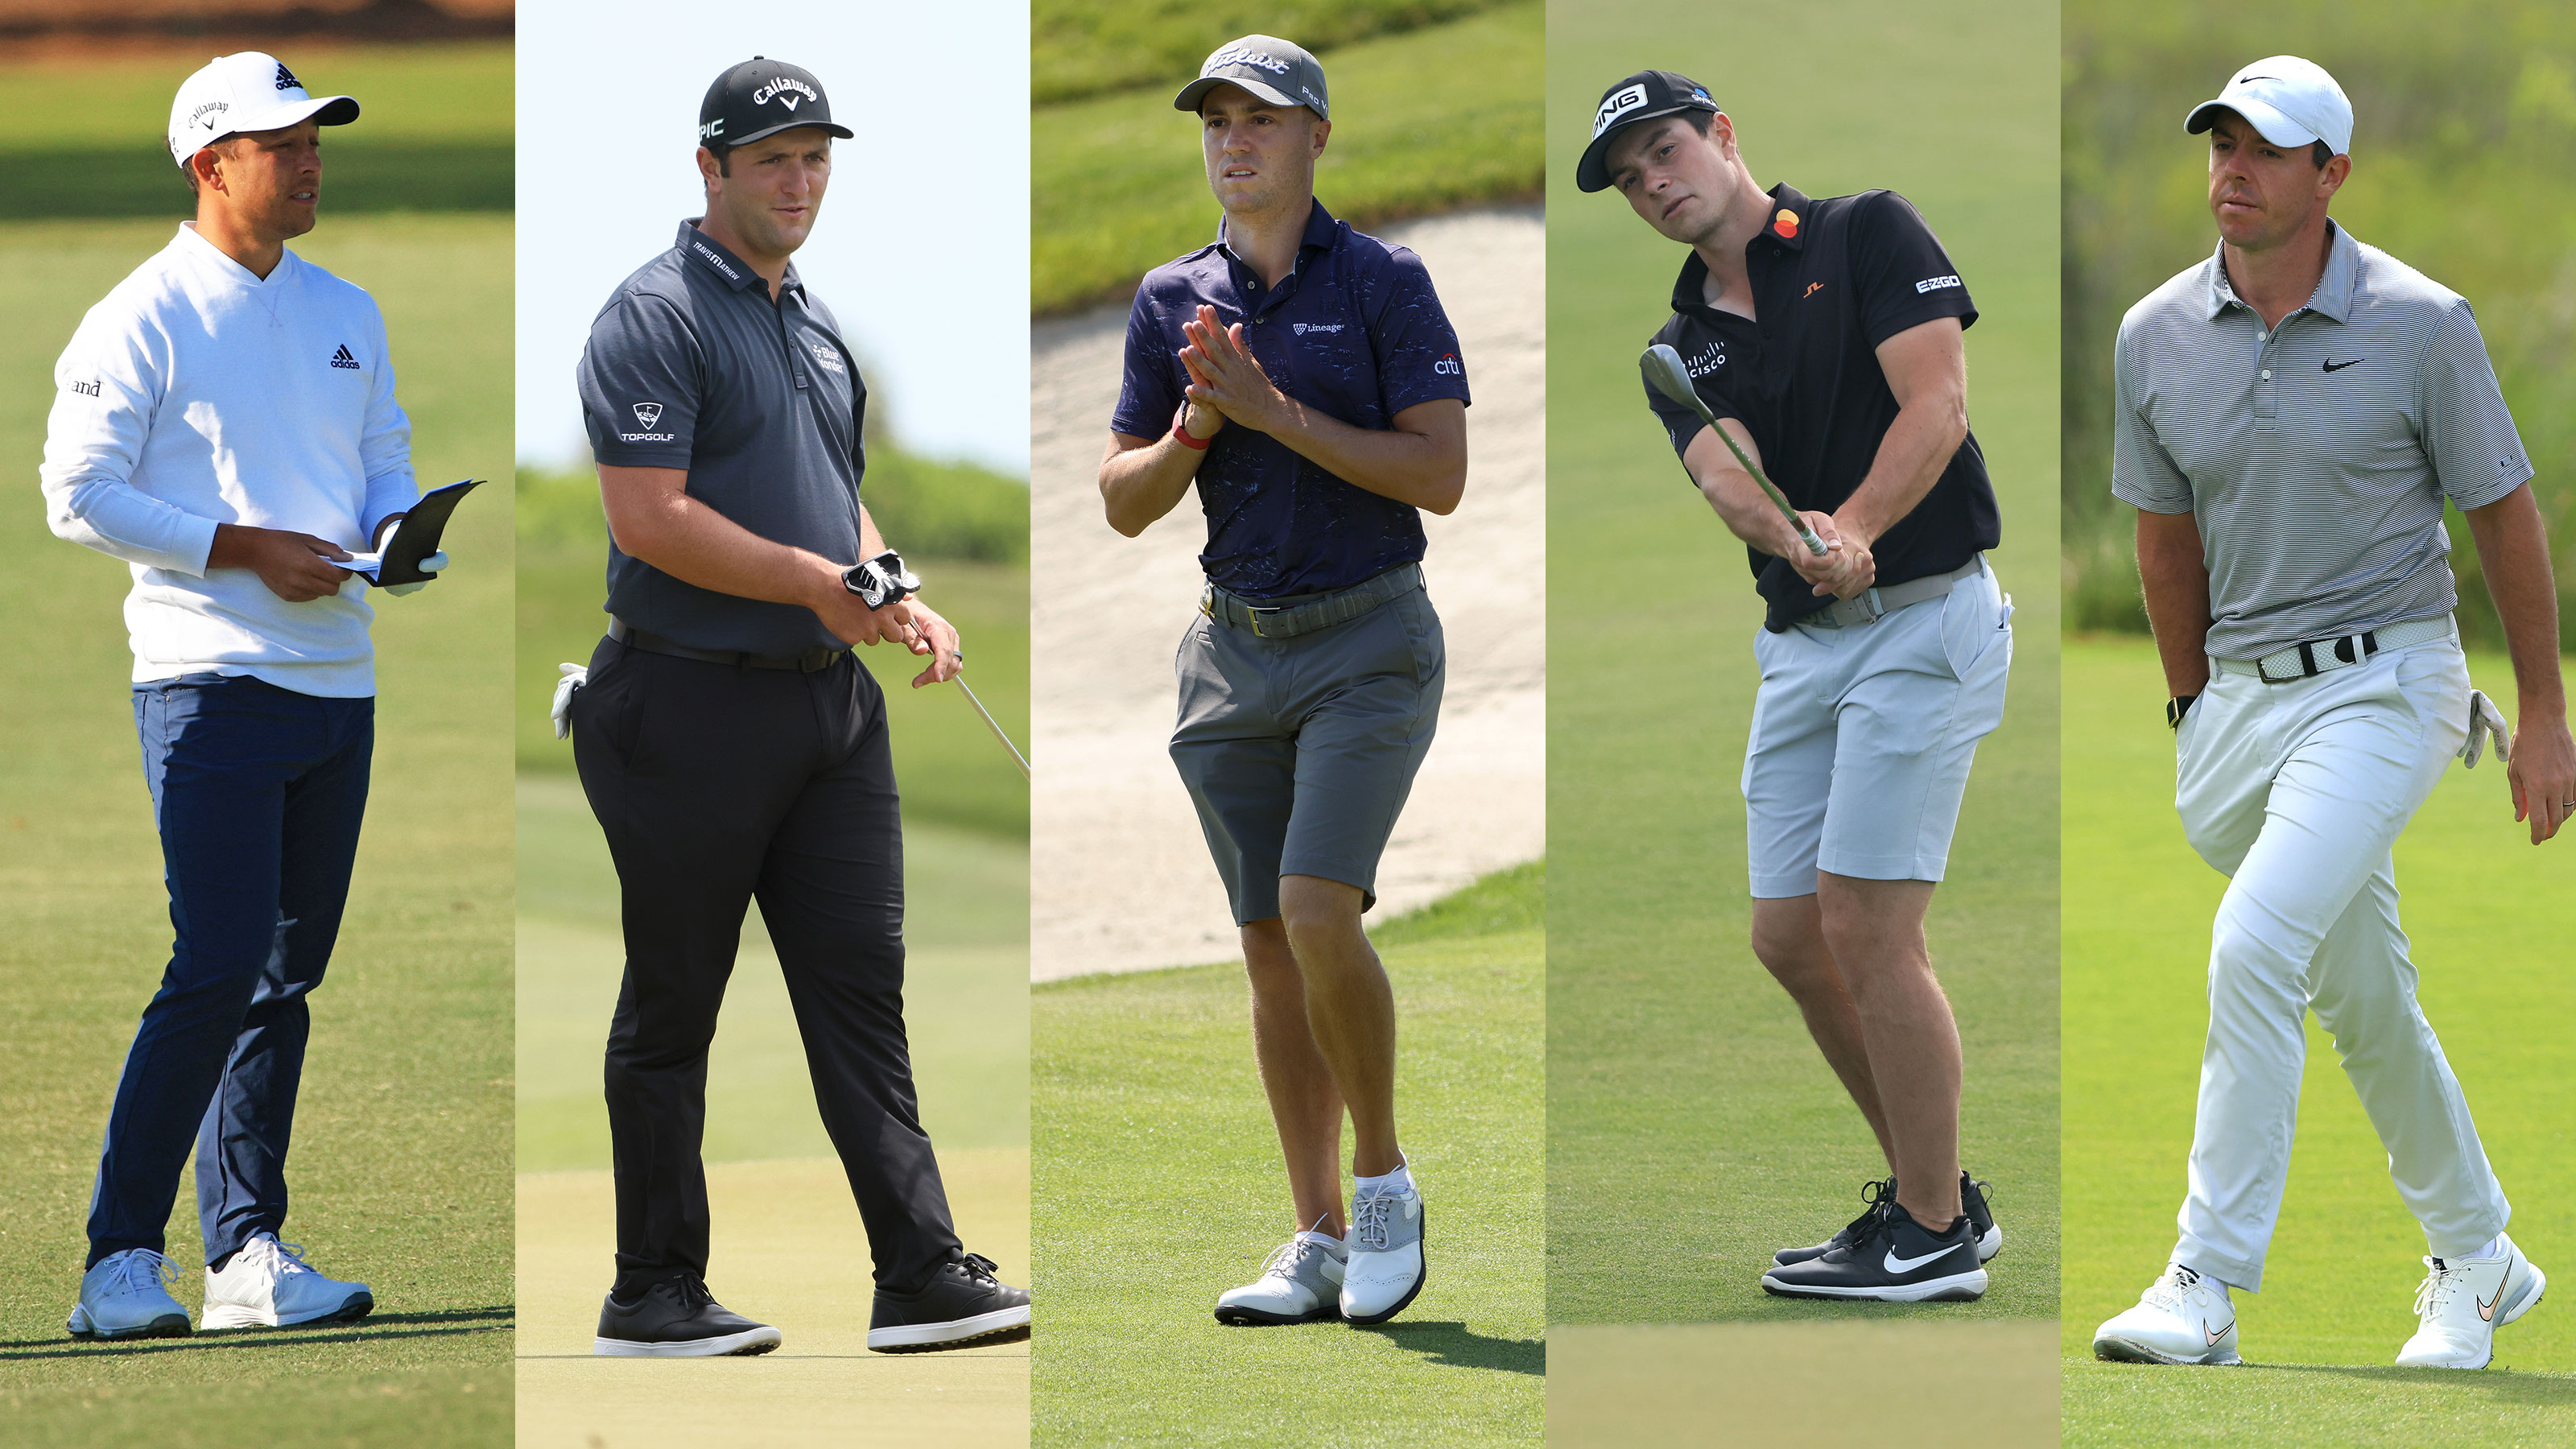 PGA Tour unveils lucrative changes as top players commit to play together  on more regular basis, Golf News and Tour Information